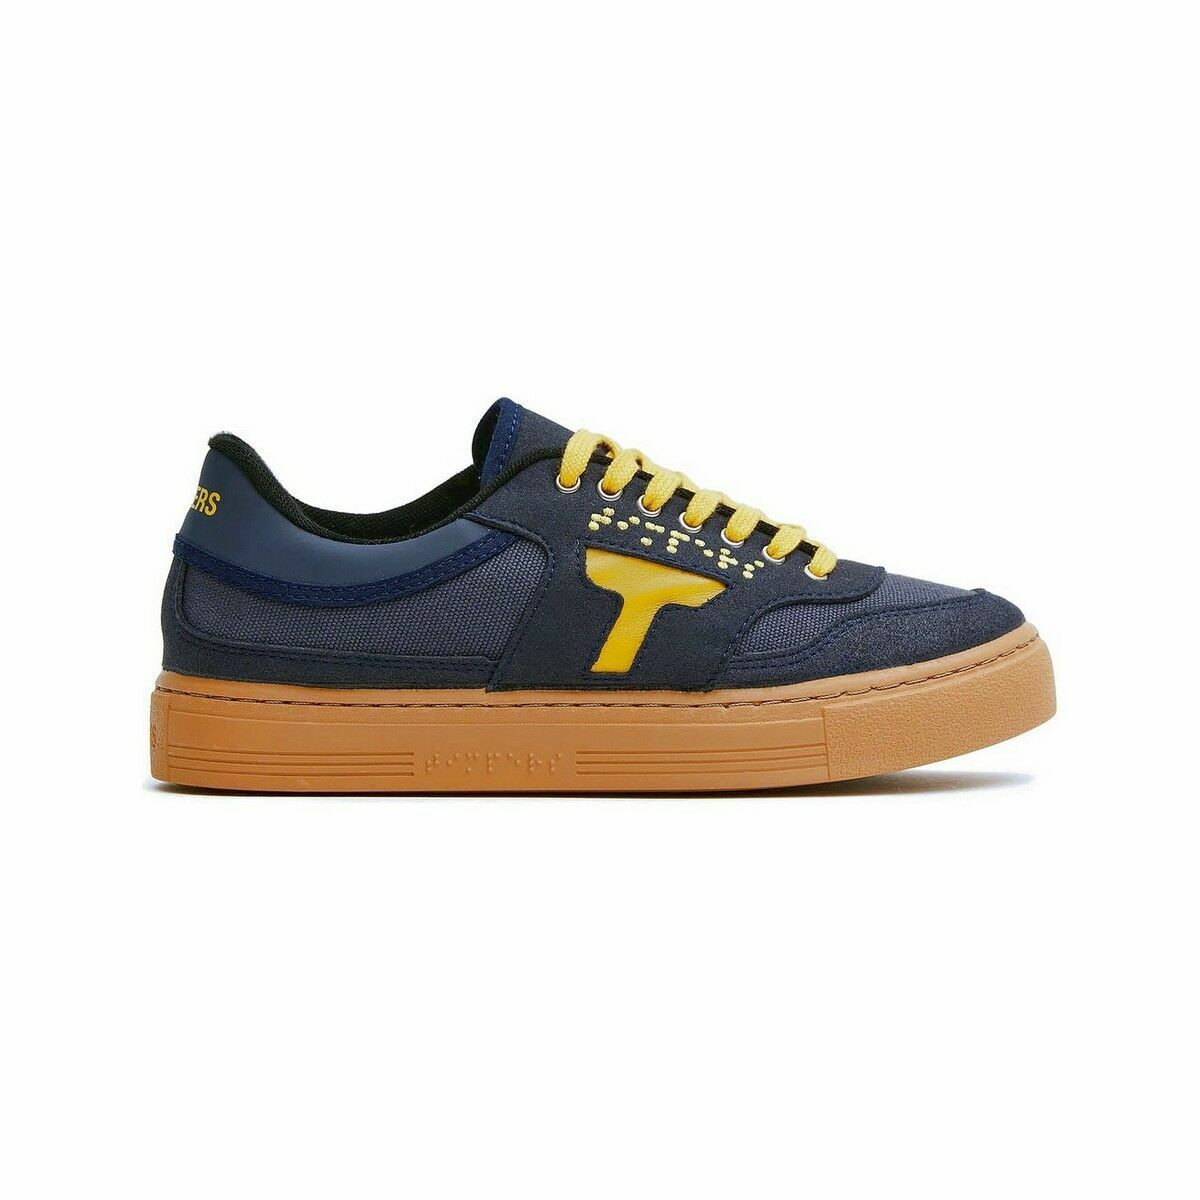 Ténis Casual Timpers Trend Midnight - azul-marino - 